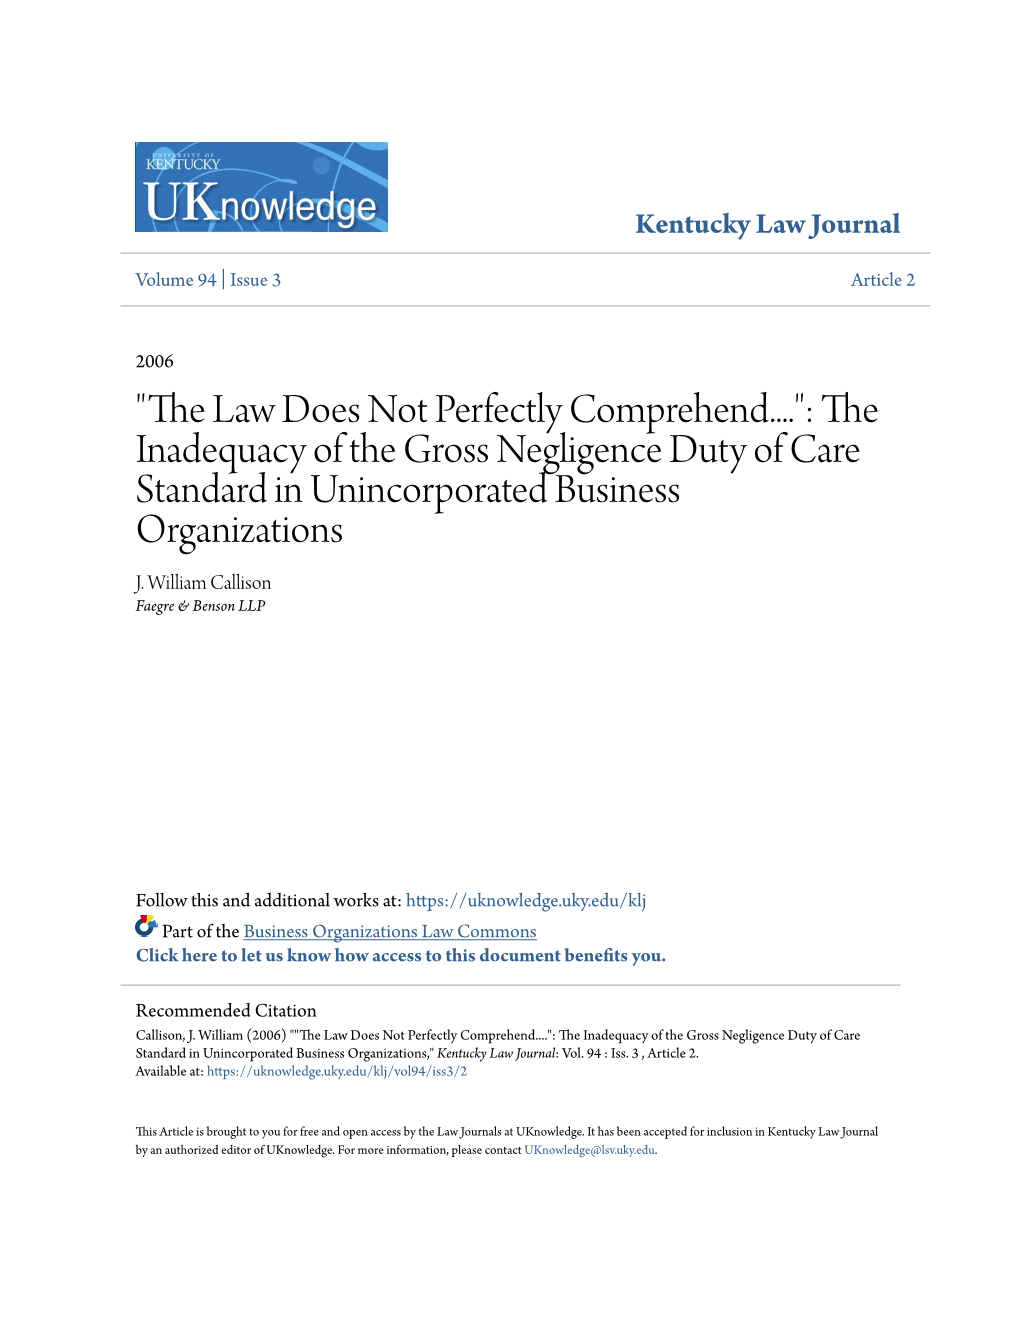 "The Law Does Not Perfectly Comprehend...": the Inadequacy Of